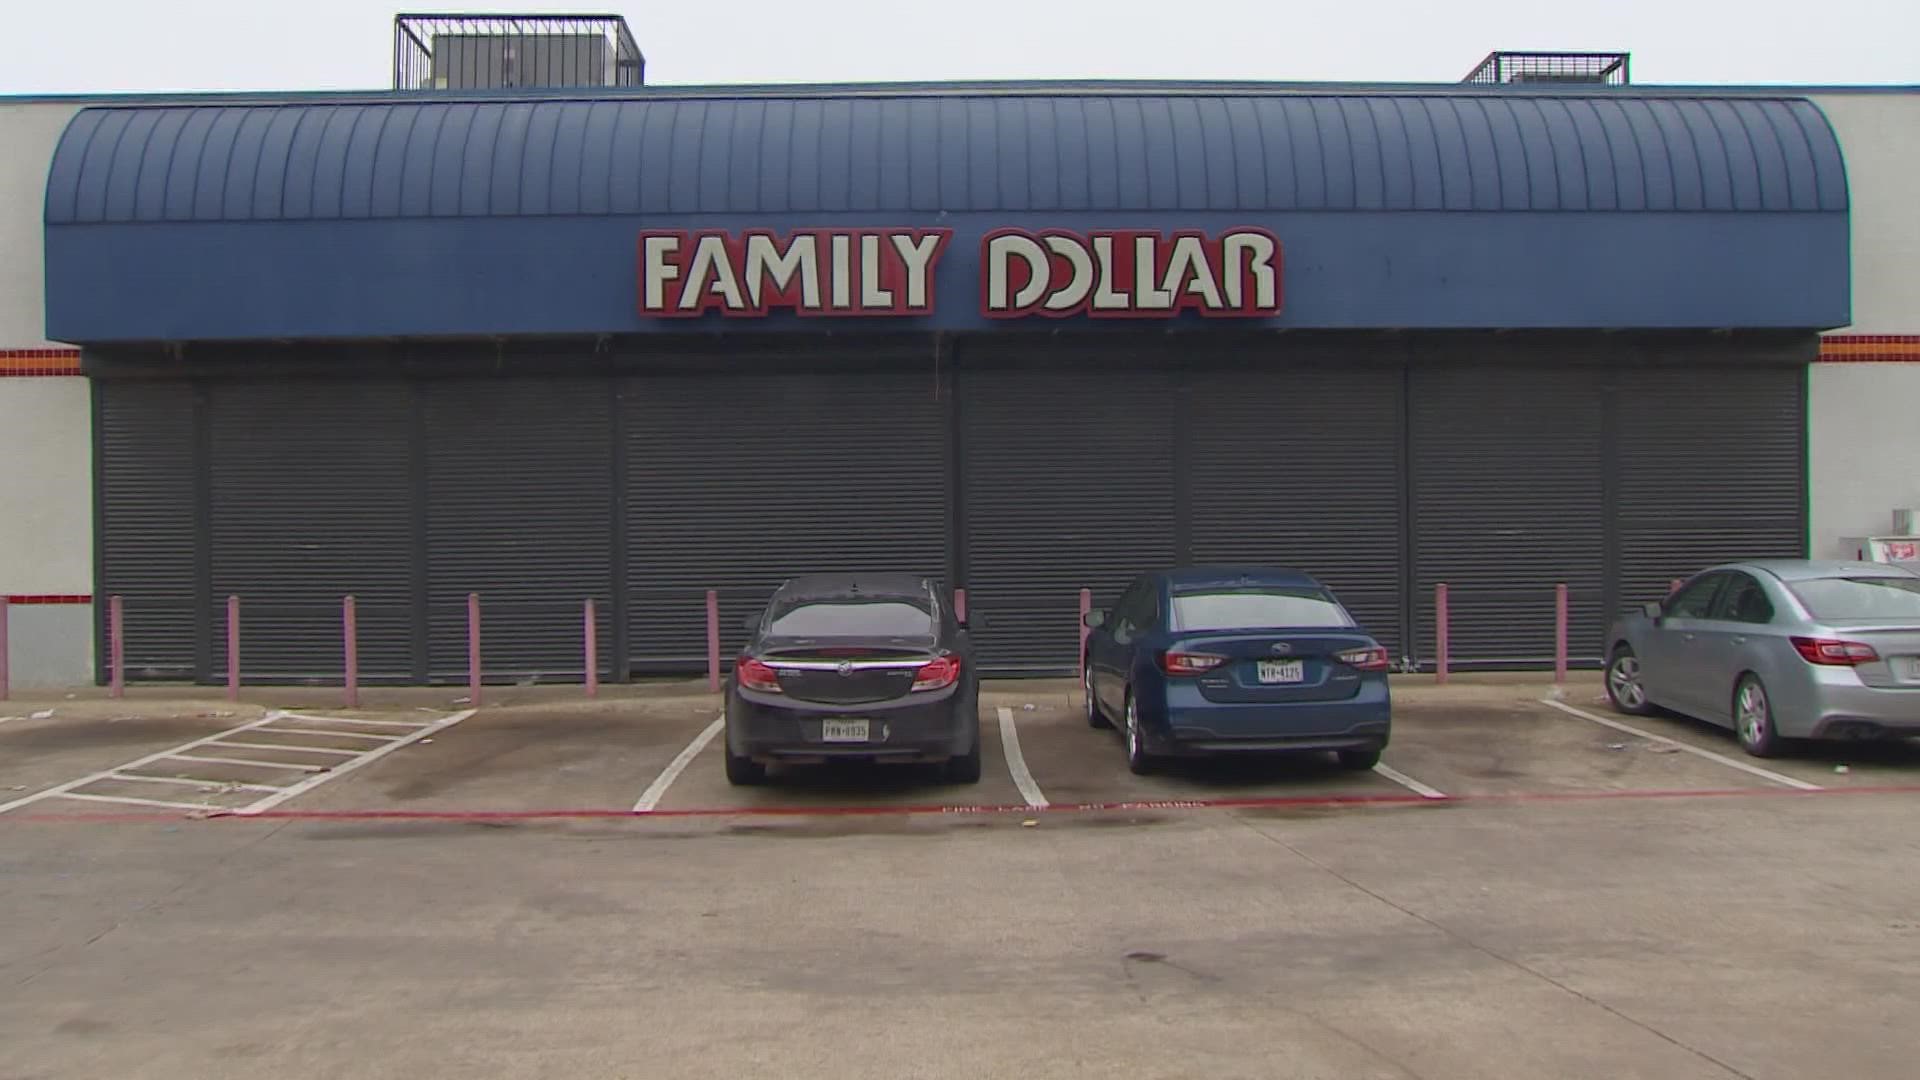 Dallas police said officers responded to a call at the store located at 1928 E. Ledbetter Drive. When officers arrived, Dallas police said they found Tenery Walker.